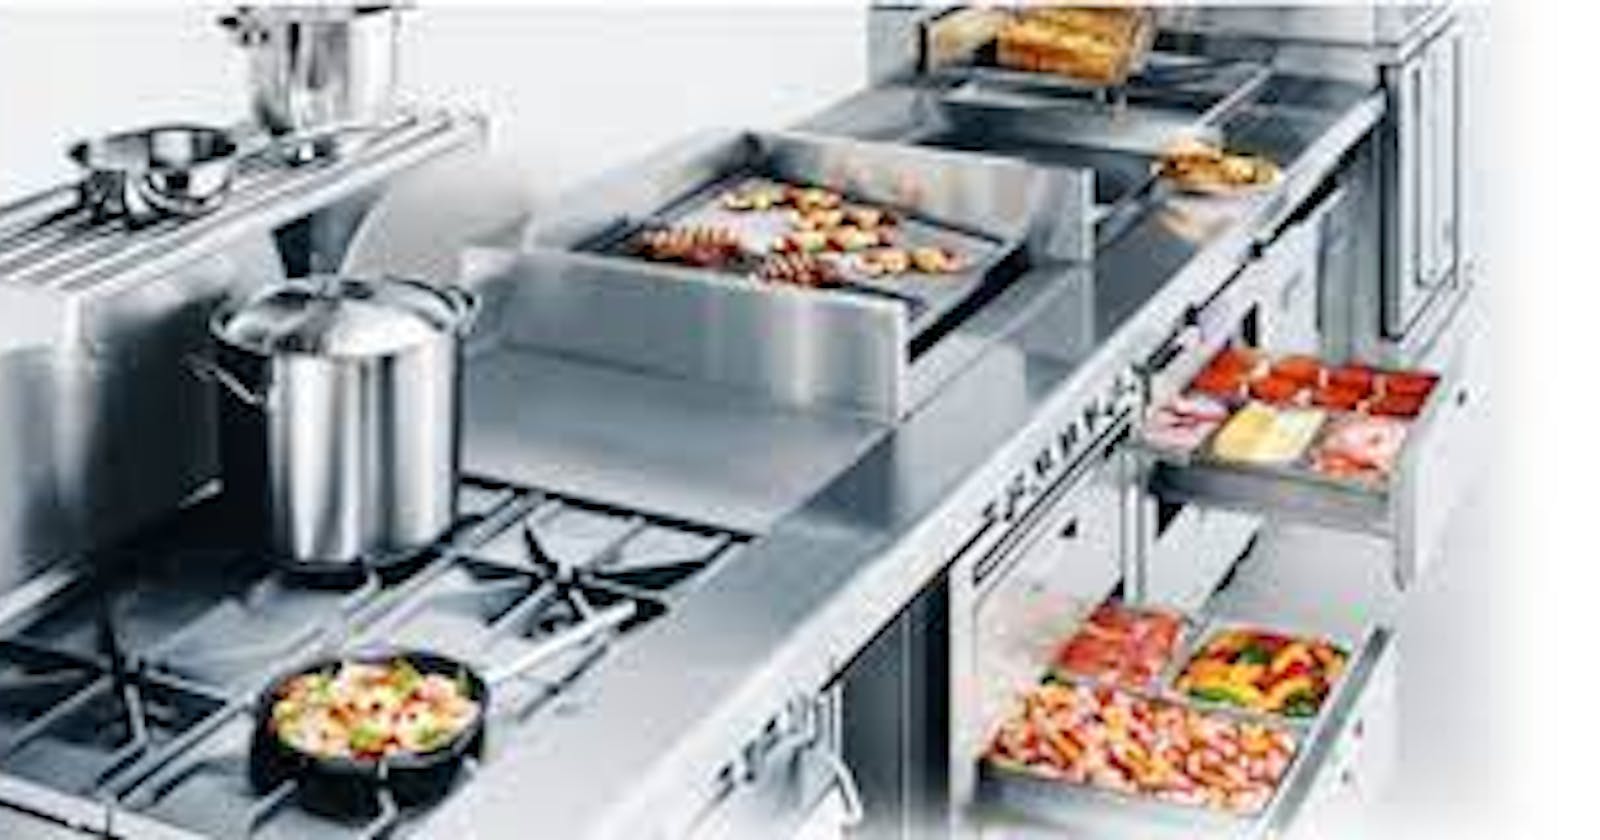 Food Service Equipment Market Share, Size, Trends, Revenue, Analysis Report 2022-2027